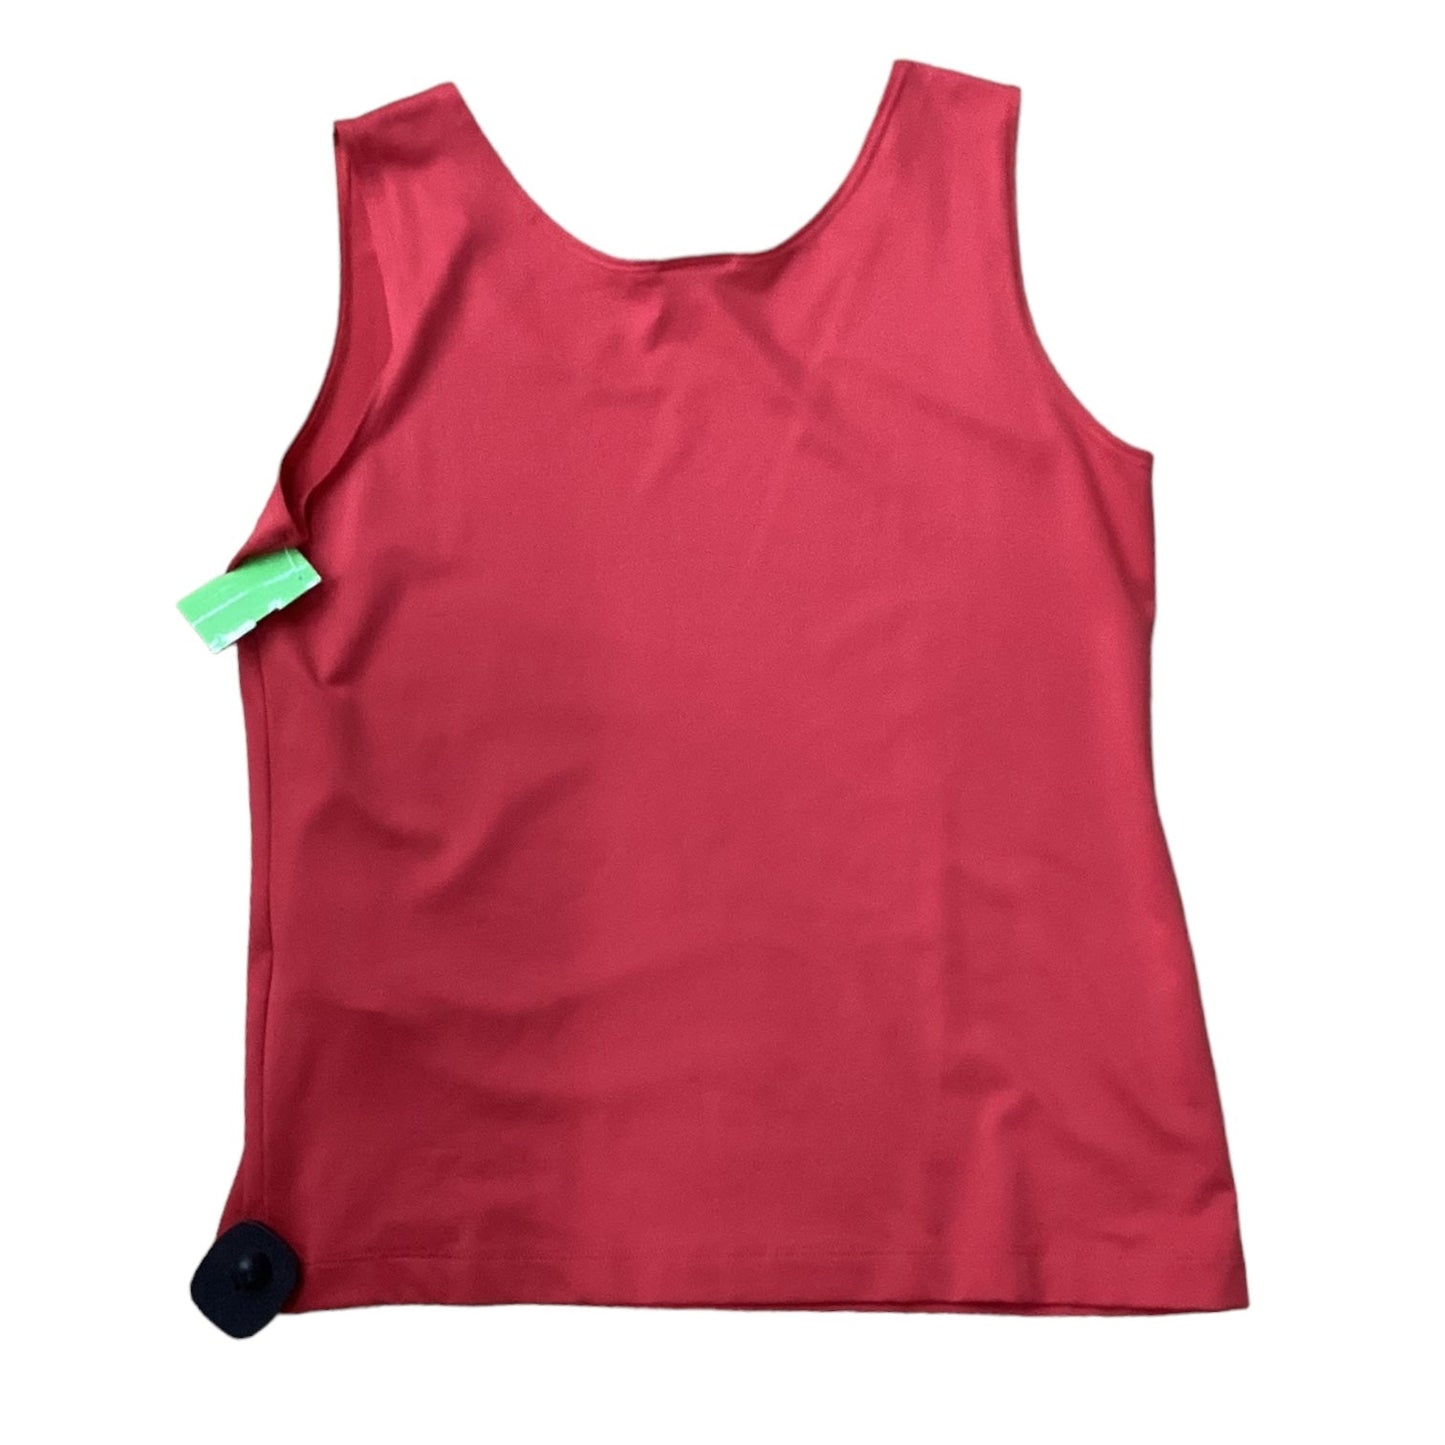 Red Top Sleeveless Chicos, Size 1